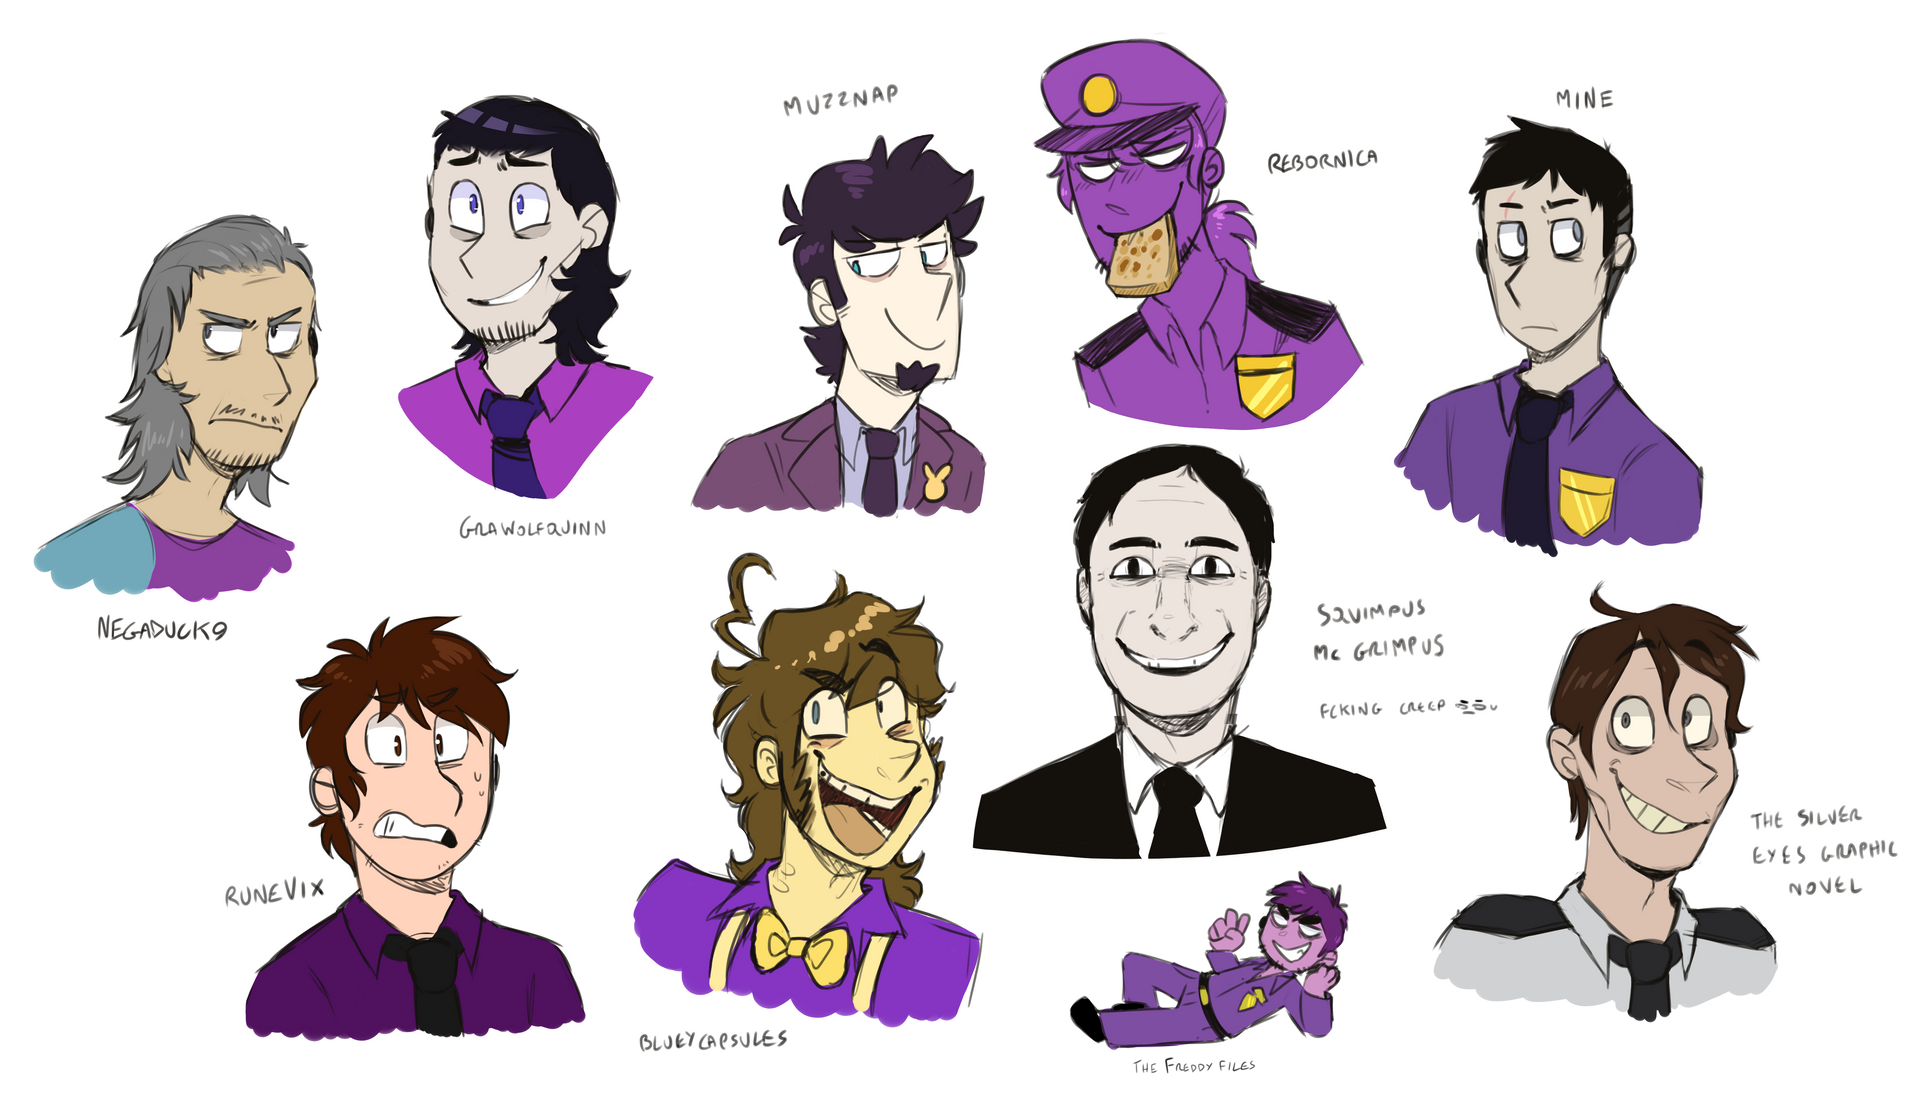 Whole bunch of Aftons by TheMandarinEternal on DeviantArt